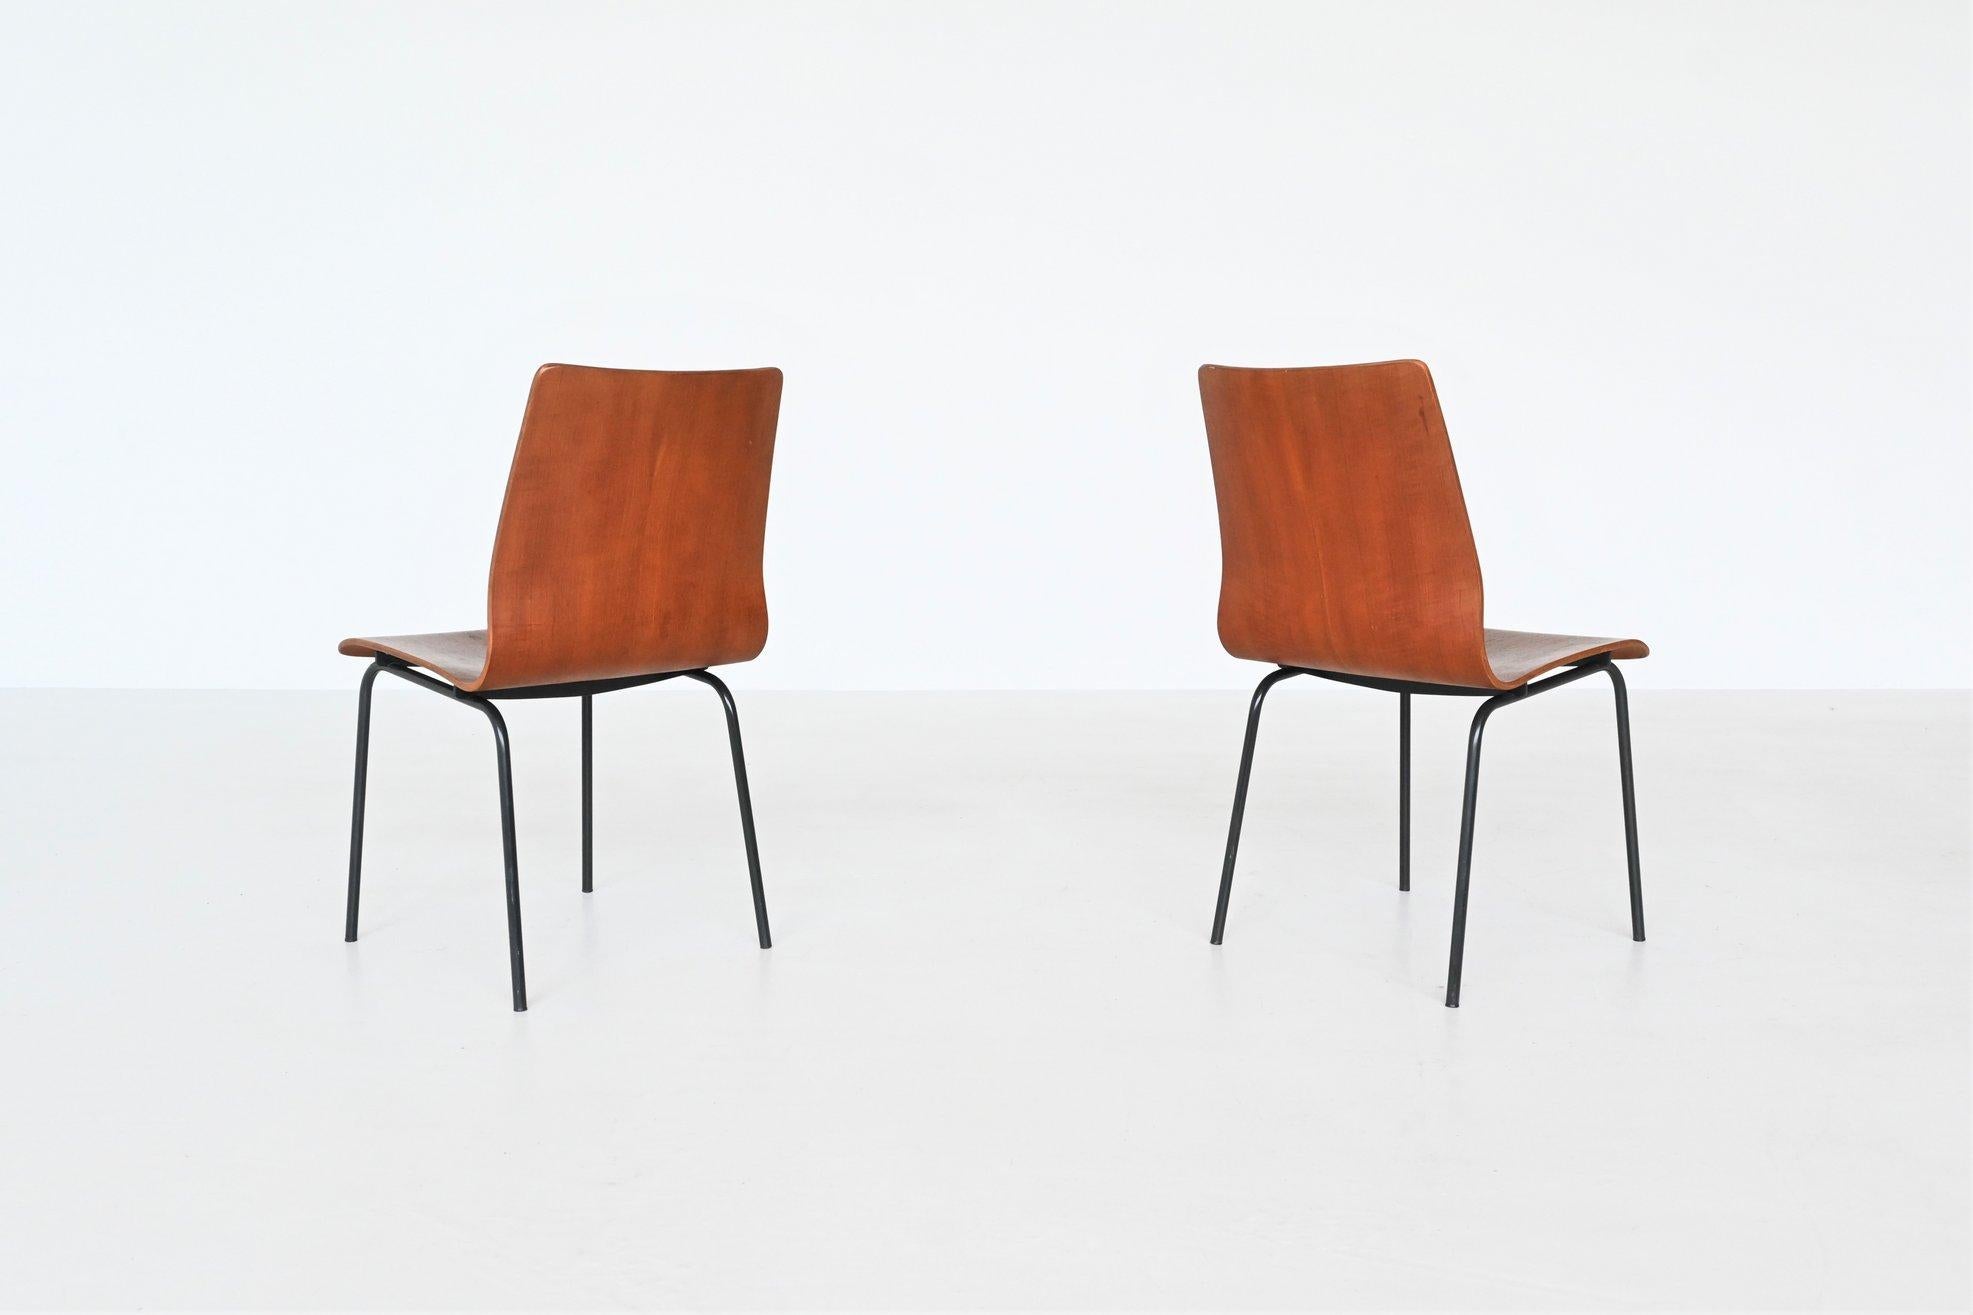 Beautiful shaped dining or side chairs from the Euroika series designed by Friso Kramer for Auping, The Netherlands 1963. Friso Kramer designed also from this series: bed, bed cabinets, table, chair, mirror and a toilet cabinet. These chairs have a